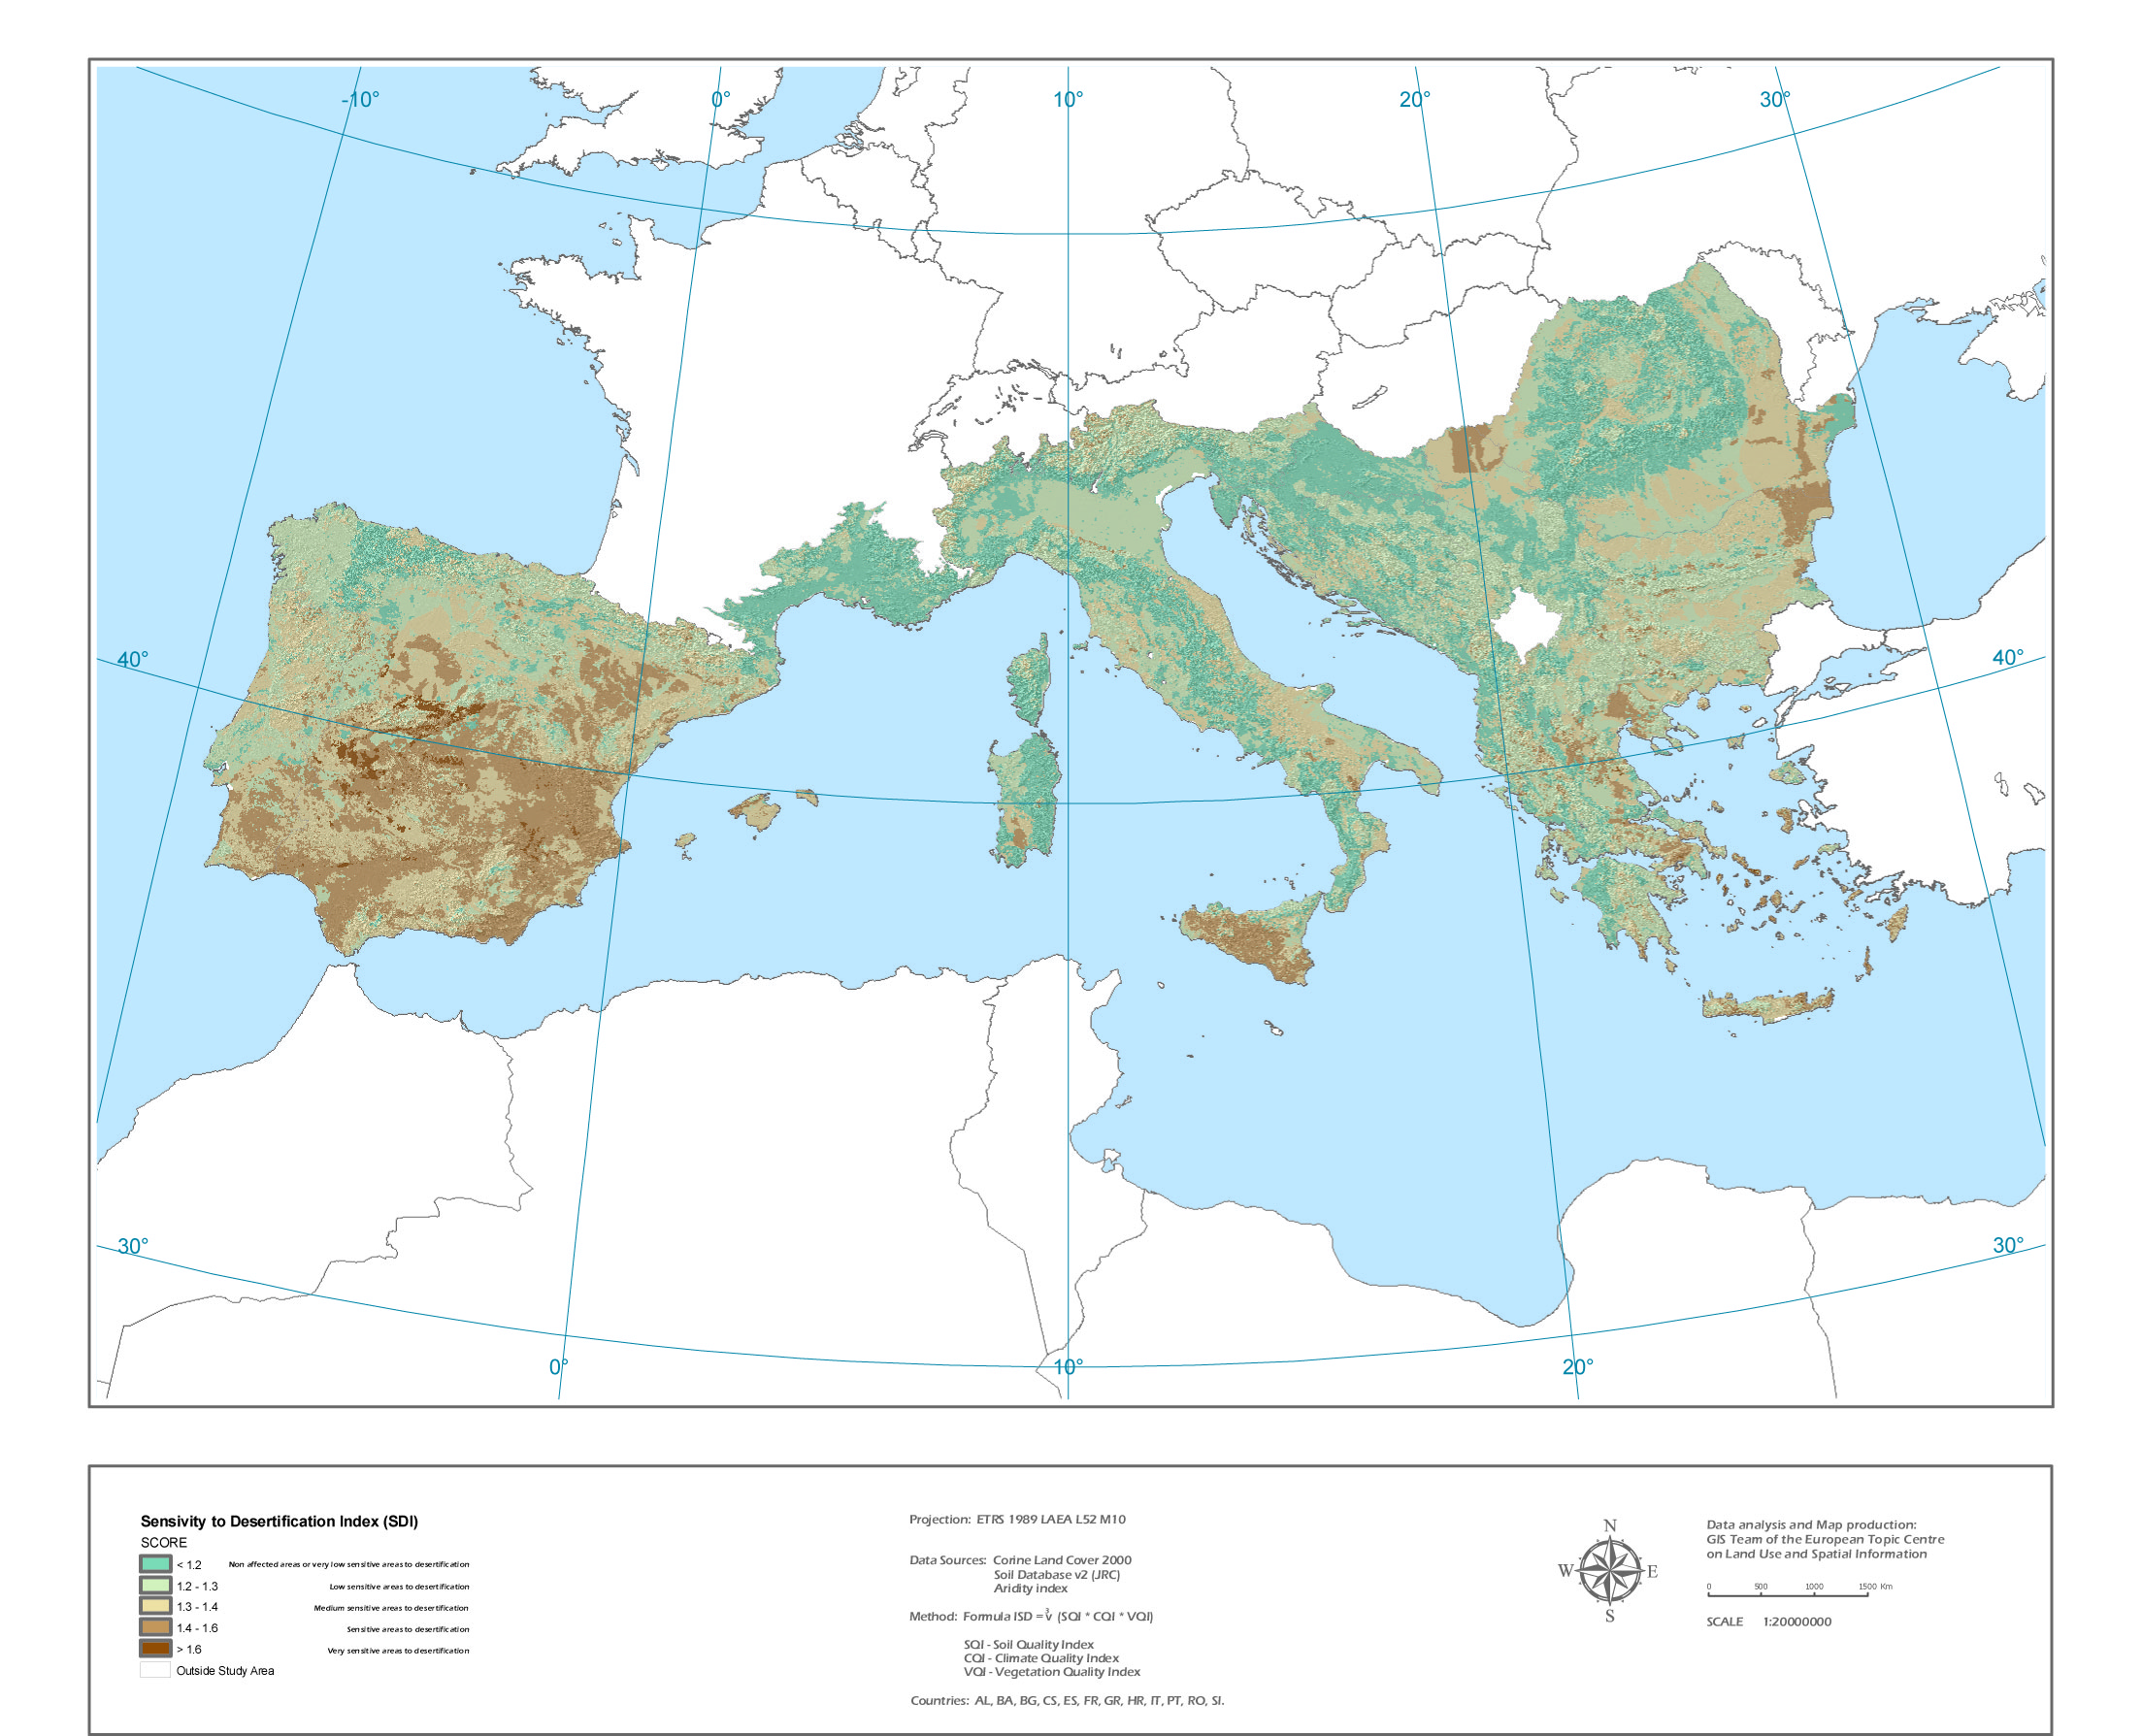 Map of sensitivity to desertification and drought in Southern Europe